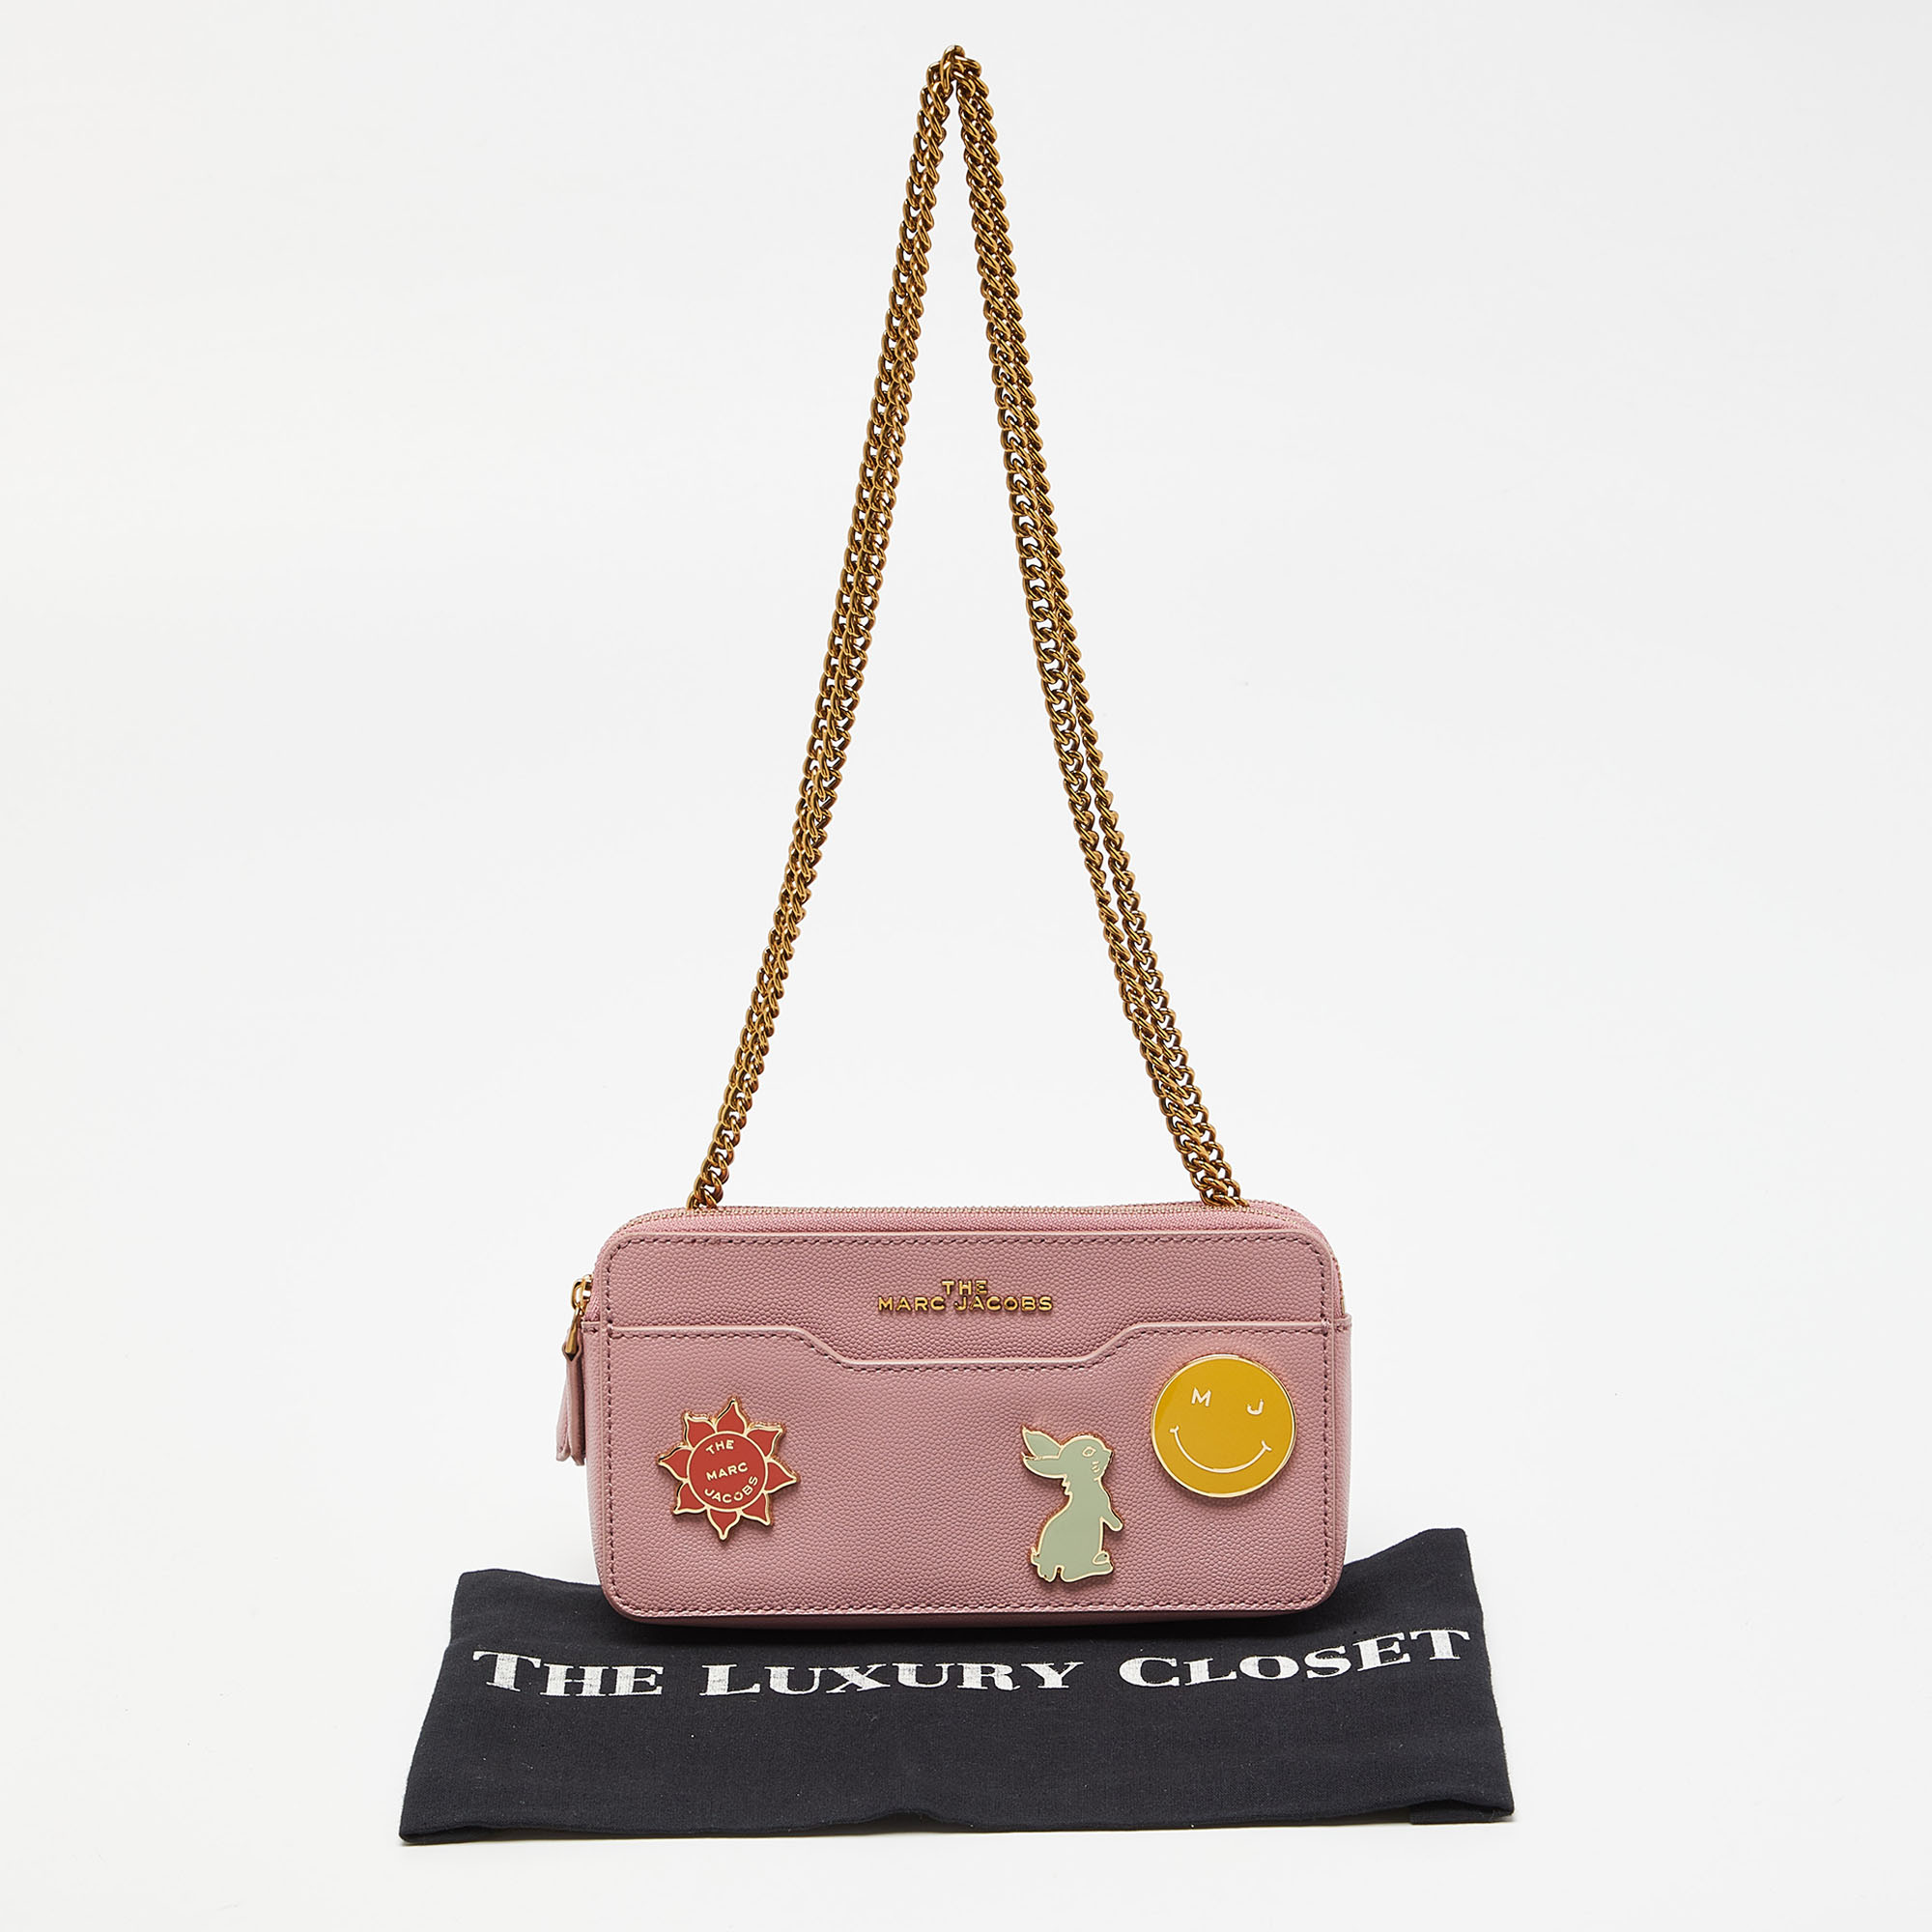 Marc Jacobs Pink Leather Double Zip Chain Clutch